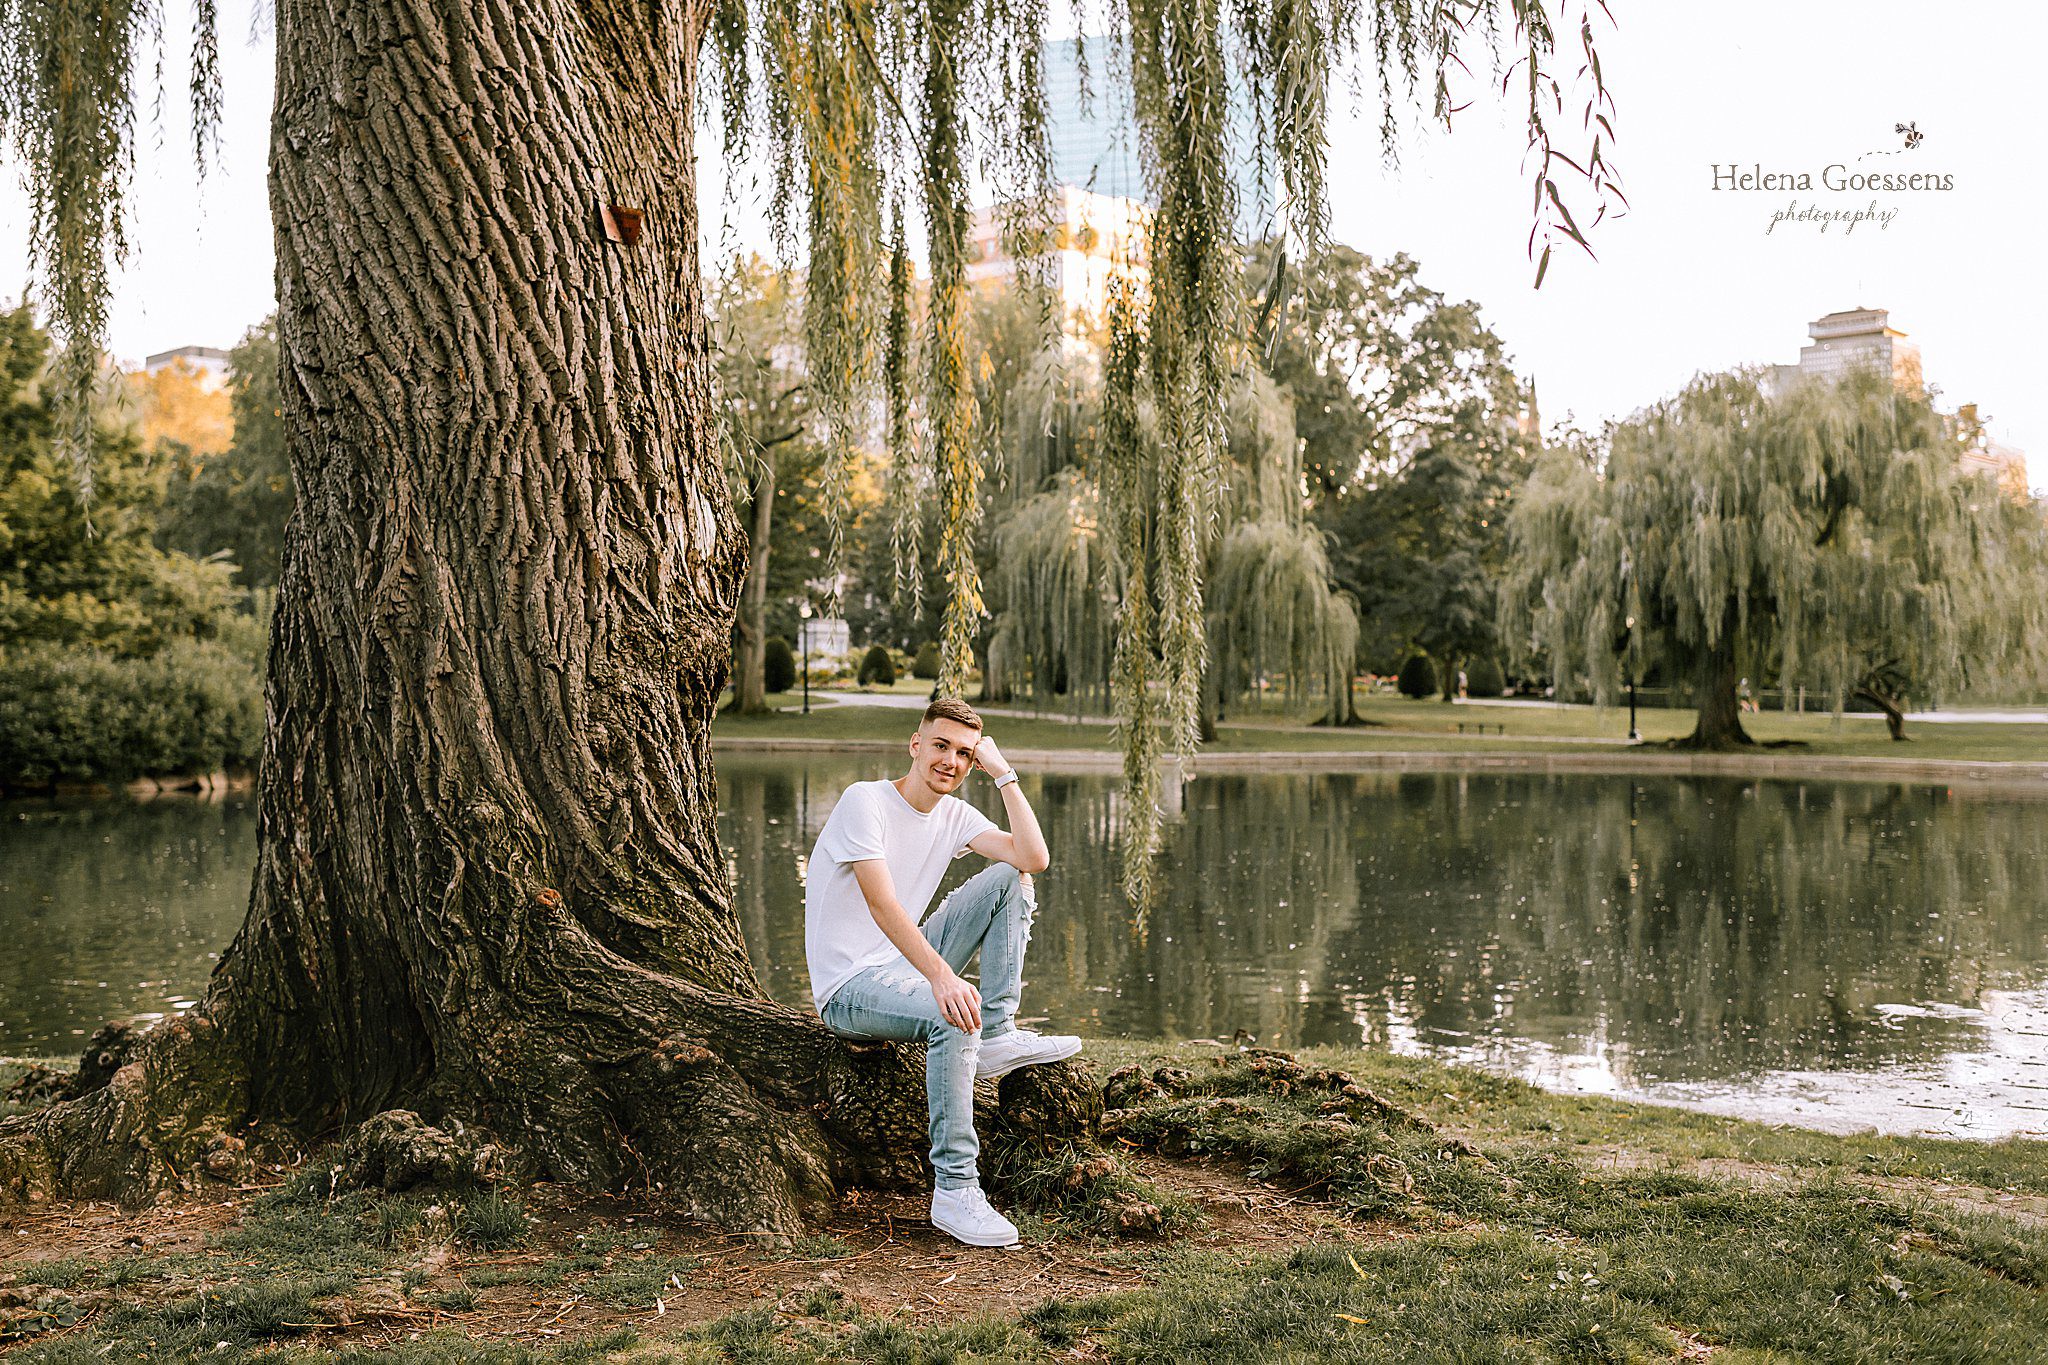 Helena Goessens Photography captures senior boy by weeping willow